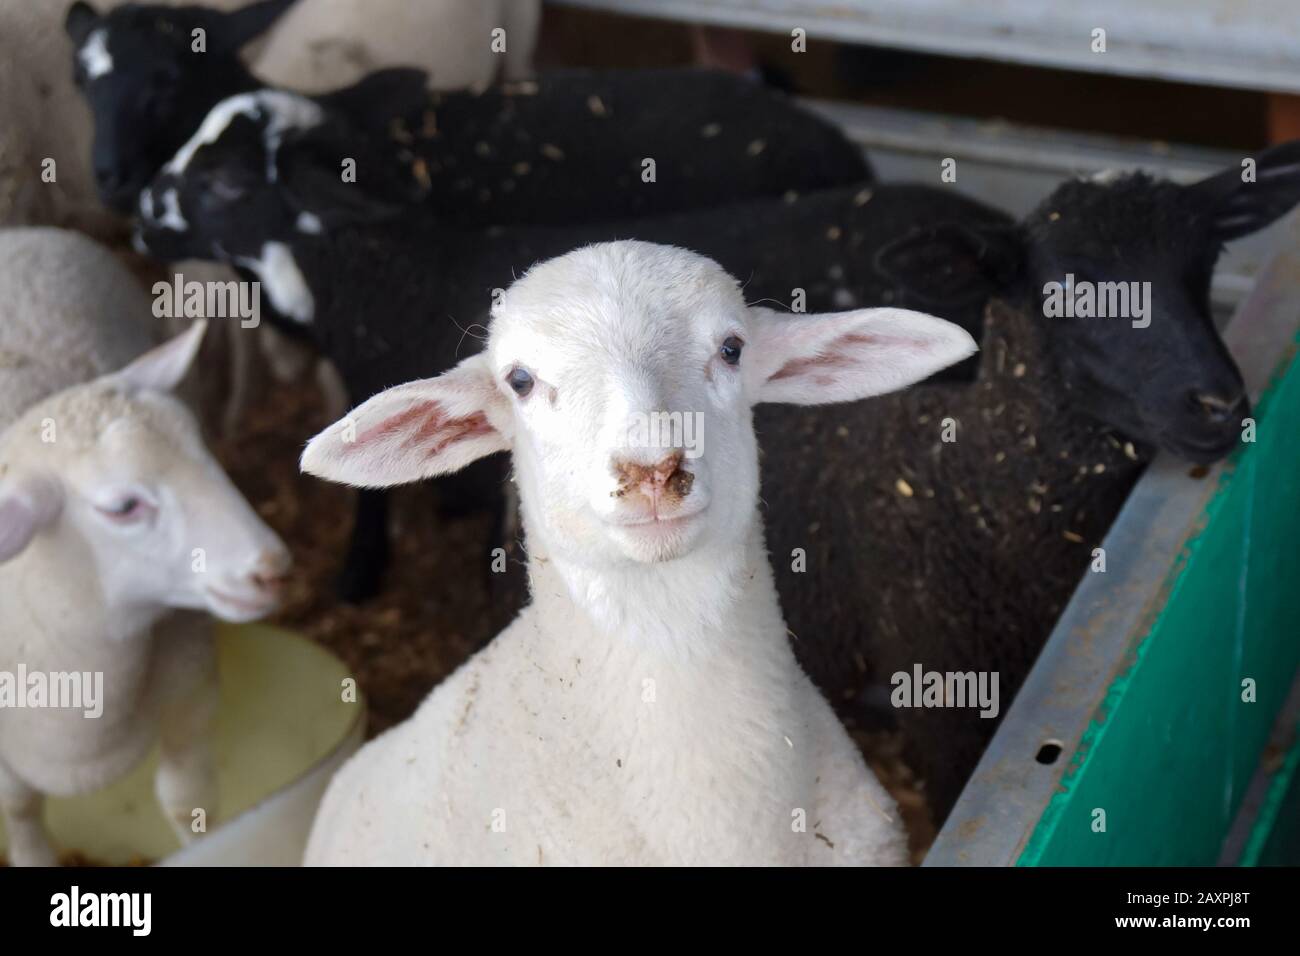 A sheep look at the camera with a funny expression. Stock Photo